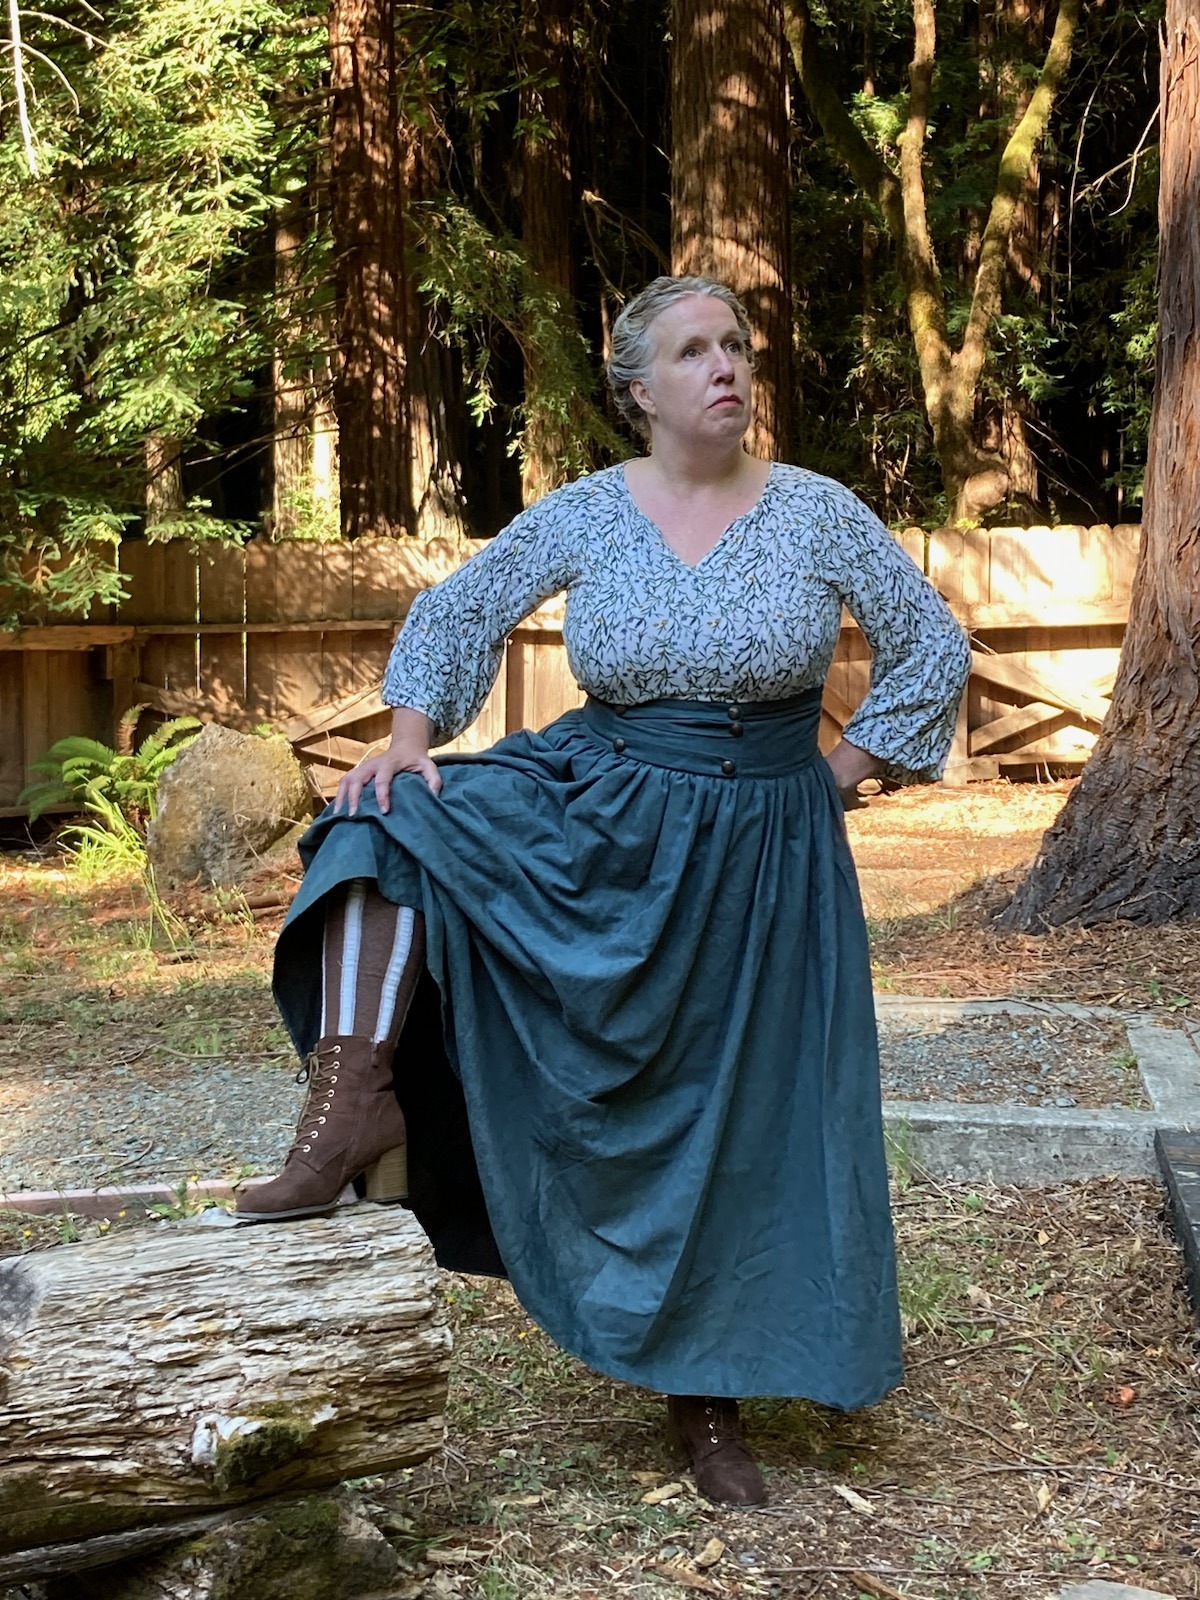 Braid Kopling performing as Laura Mahan. This is her Yosemite story, shared in celebration of our centennial.